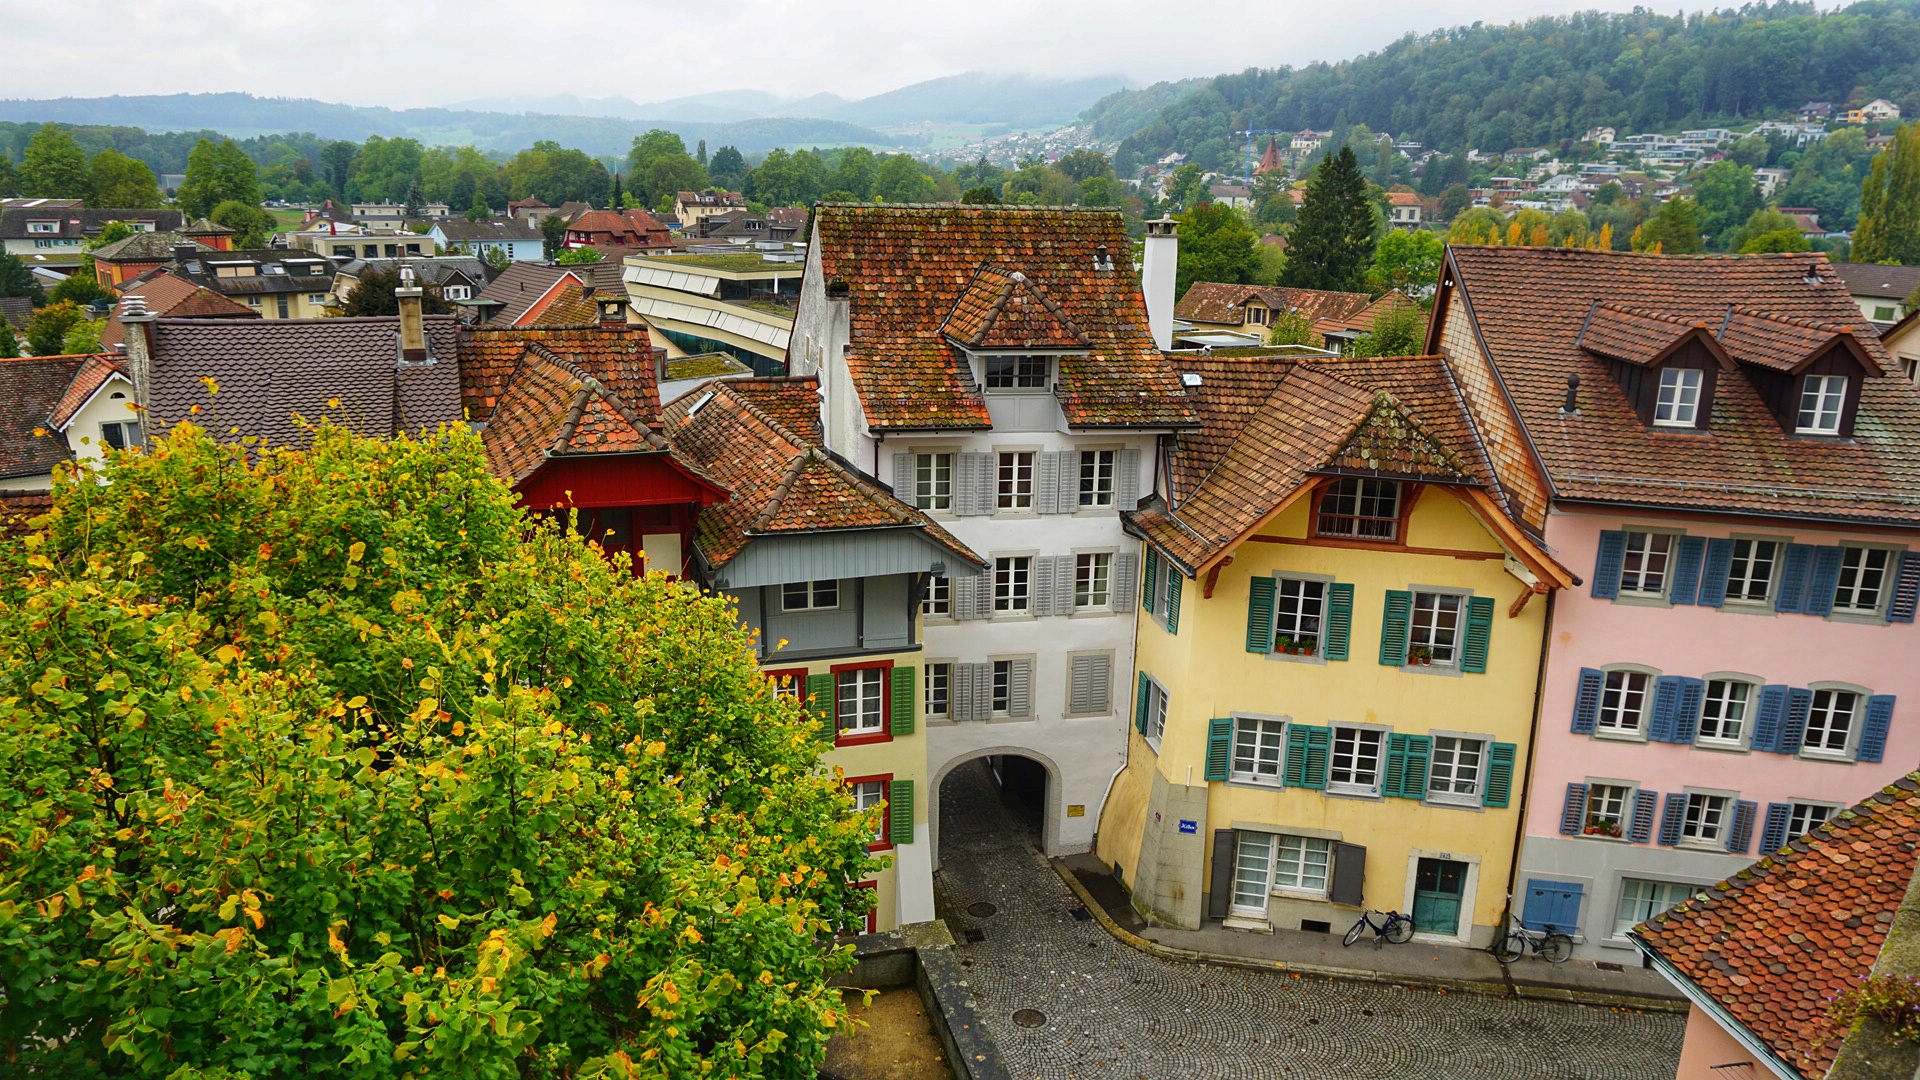 Living in Switzerland: My Top Places to Visit